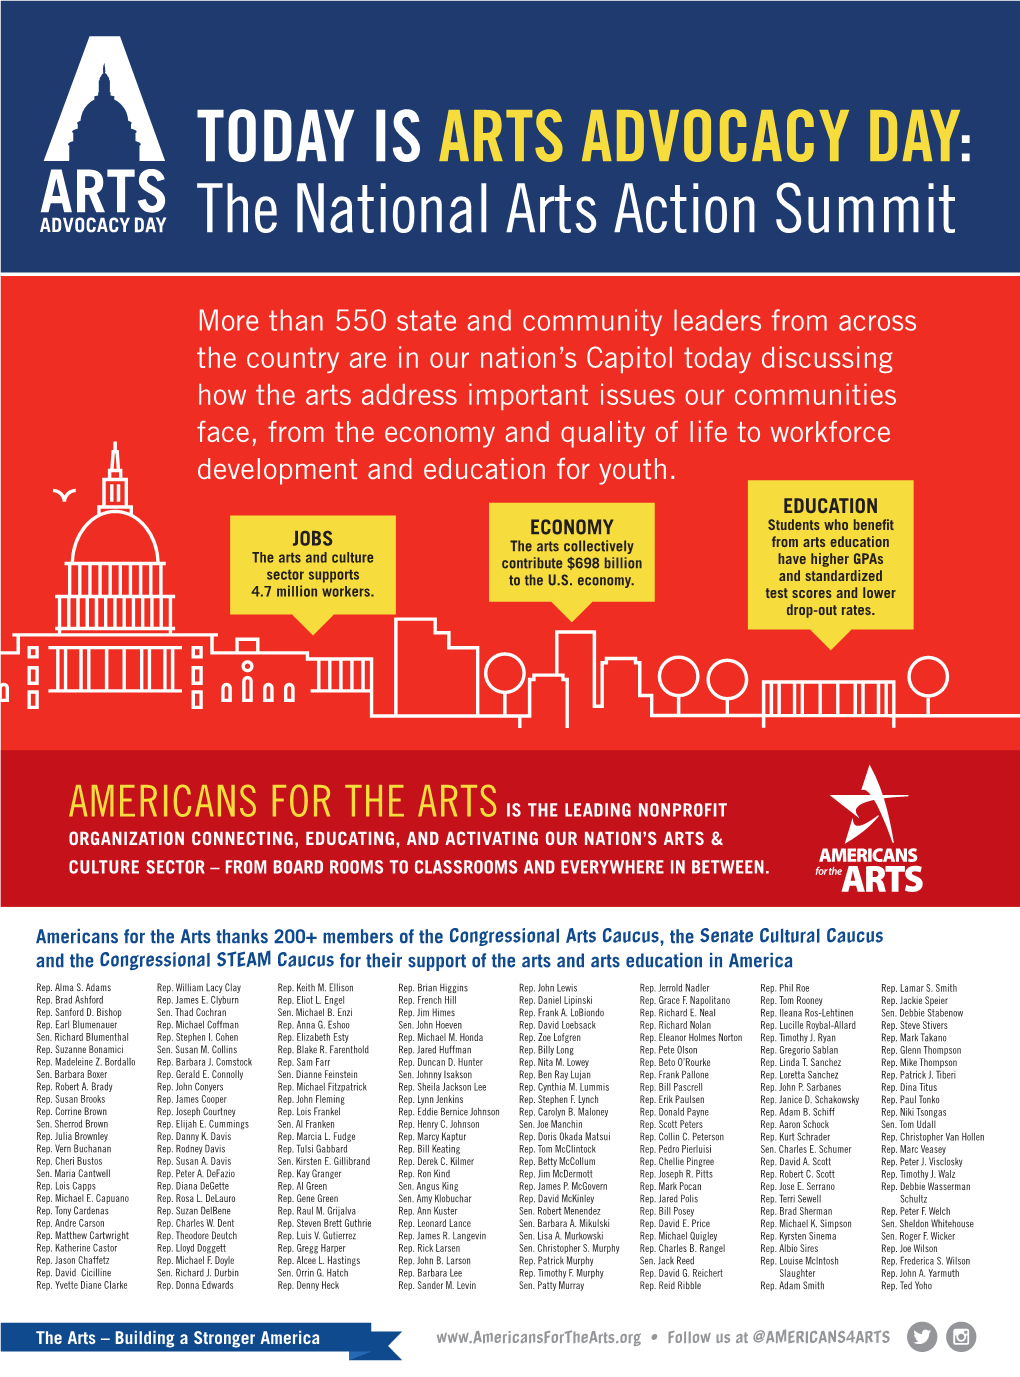 TODAY IS ARTS ADVOCACY DAY: the National Arts Action Summit